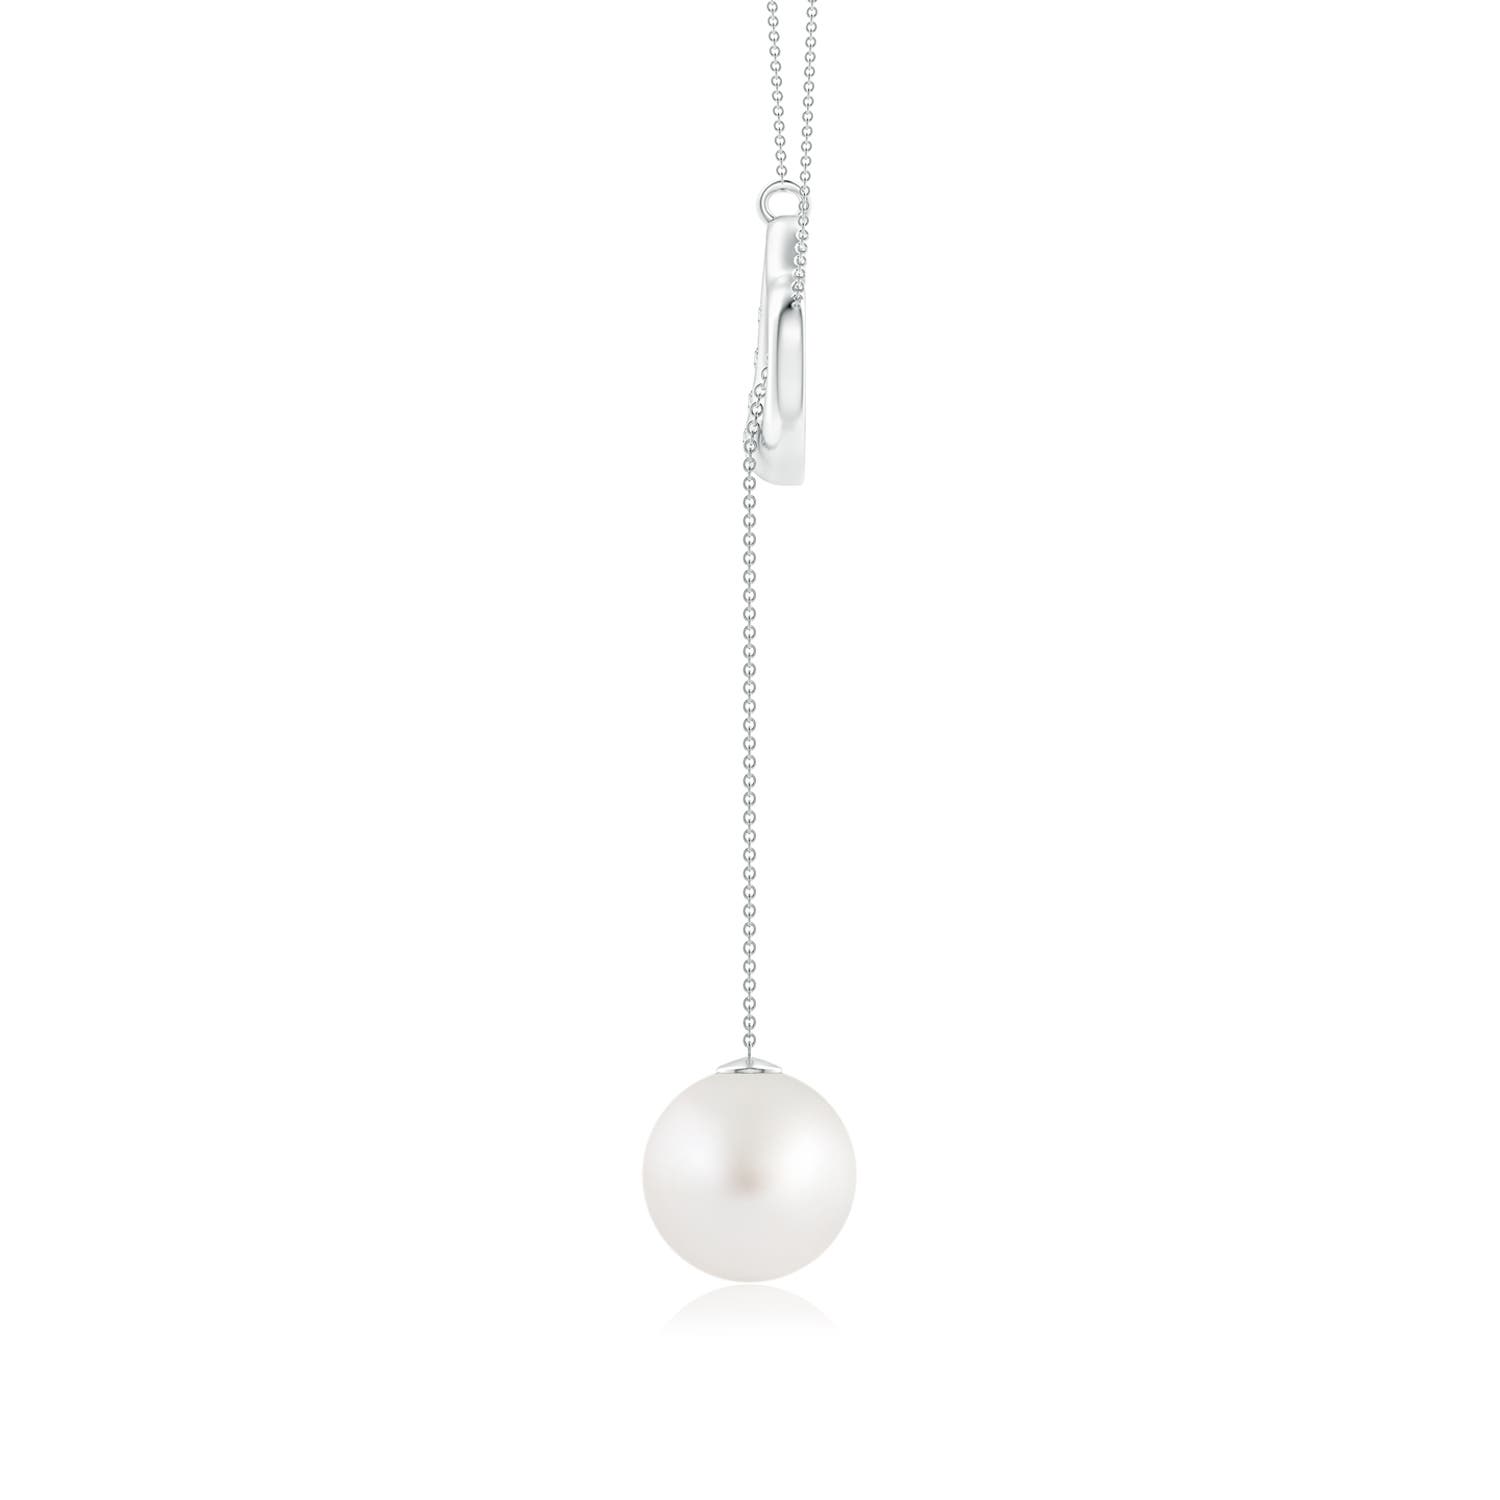 AA - South Sea Cultured Pearl / 5.28 CT / 14 KT White Gold